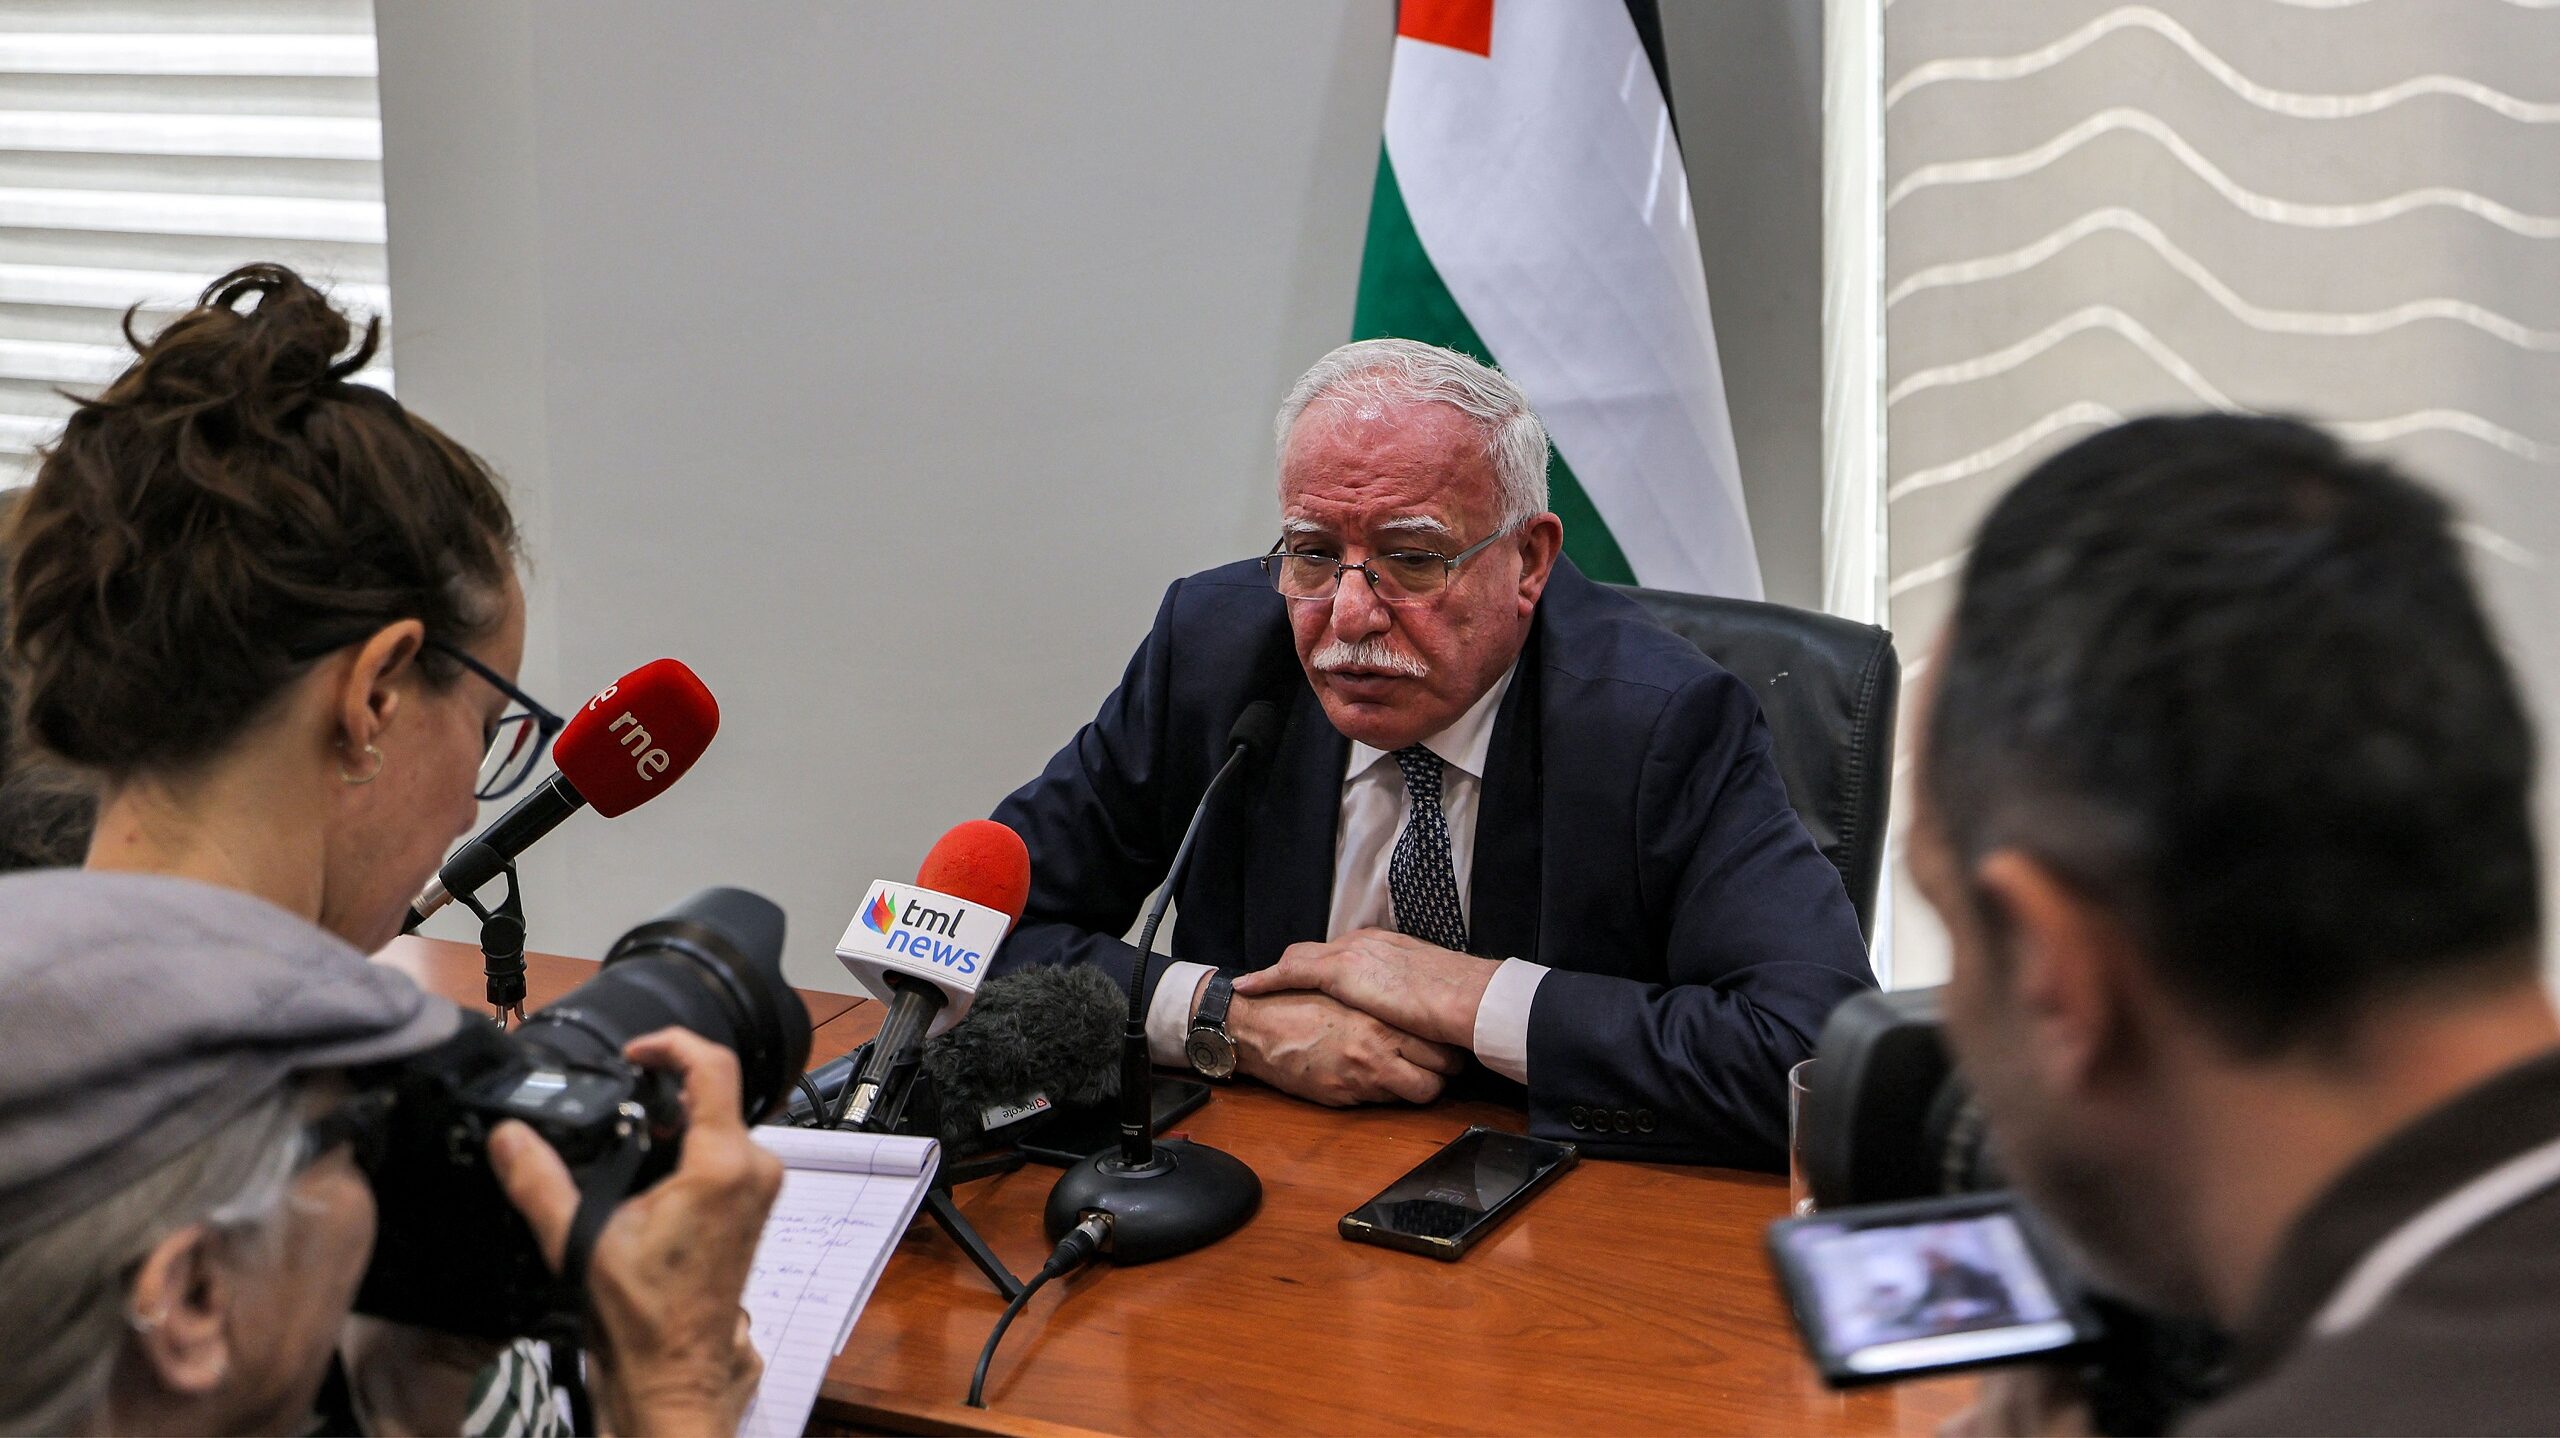 Palestinian Authority Accuses Israel of International Law Violations, Plans Legal Action